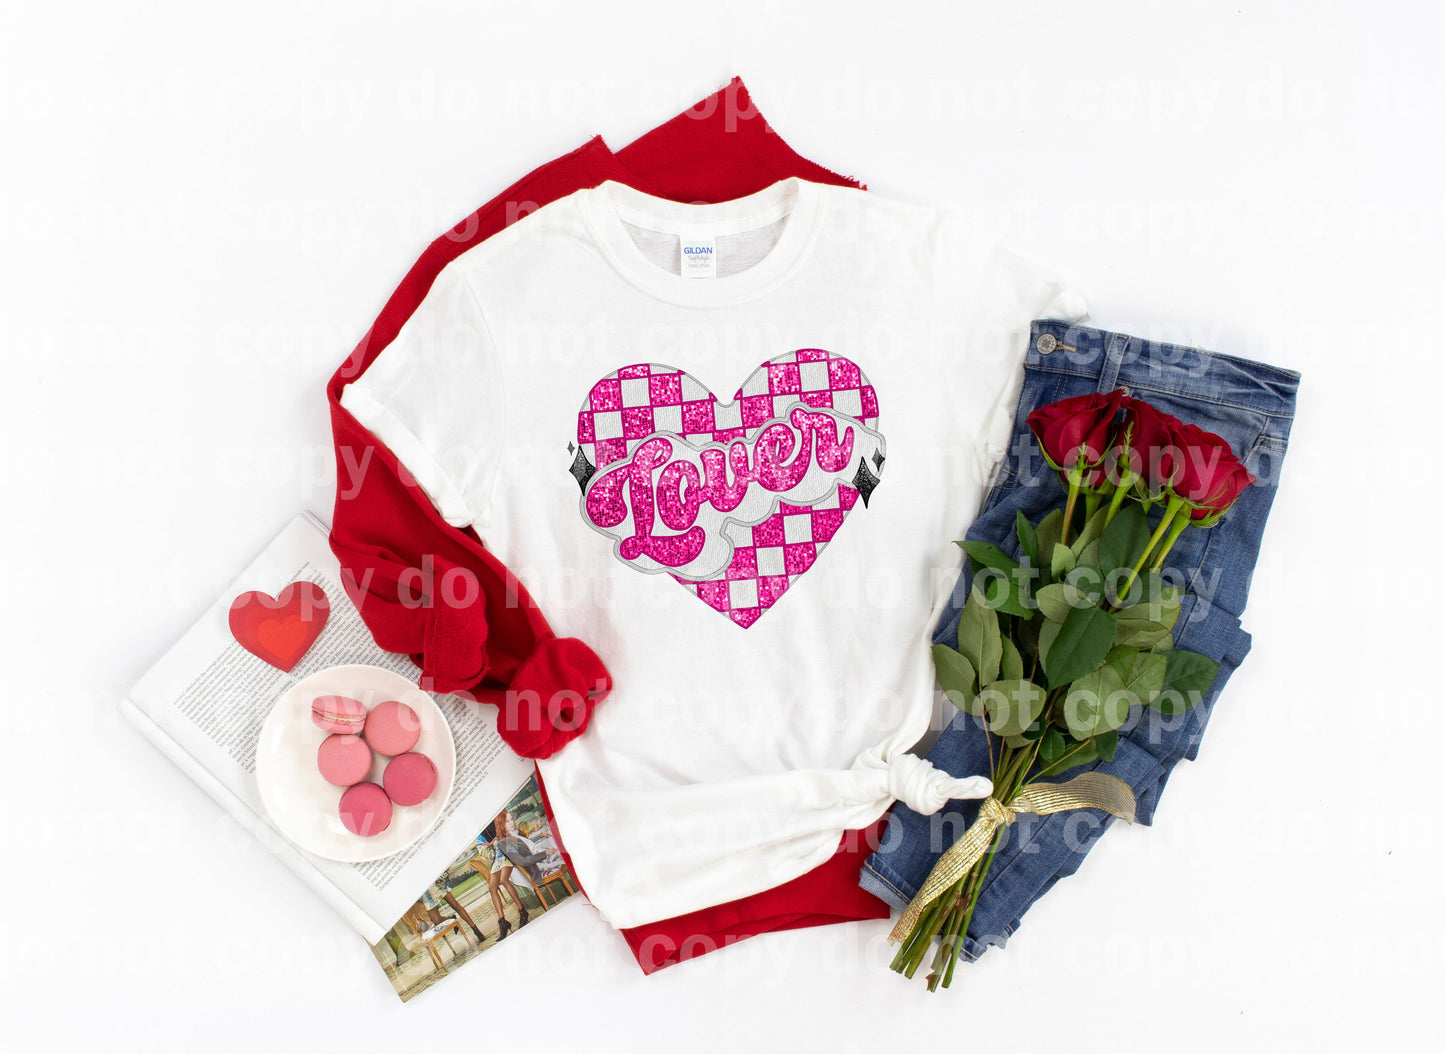 Lover Checkered Heart with Optional Sleeve Design Dream Print or Sublimation Print